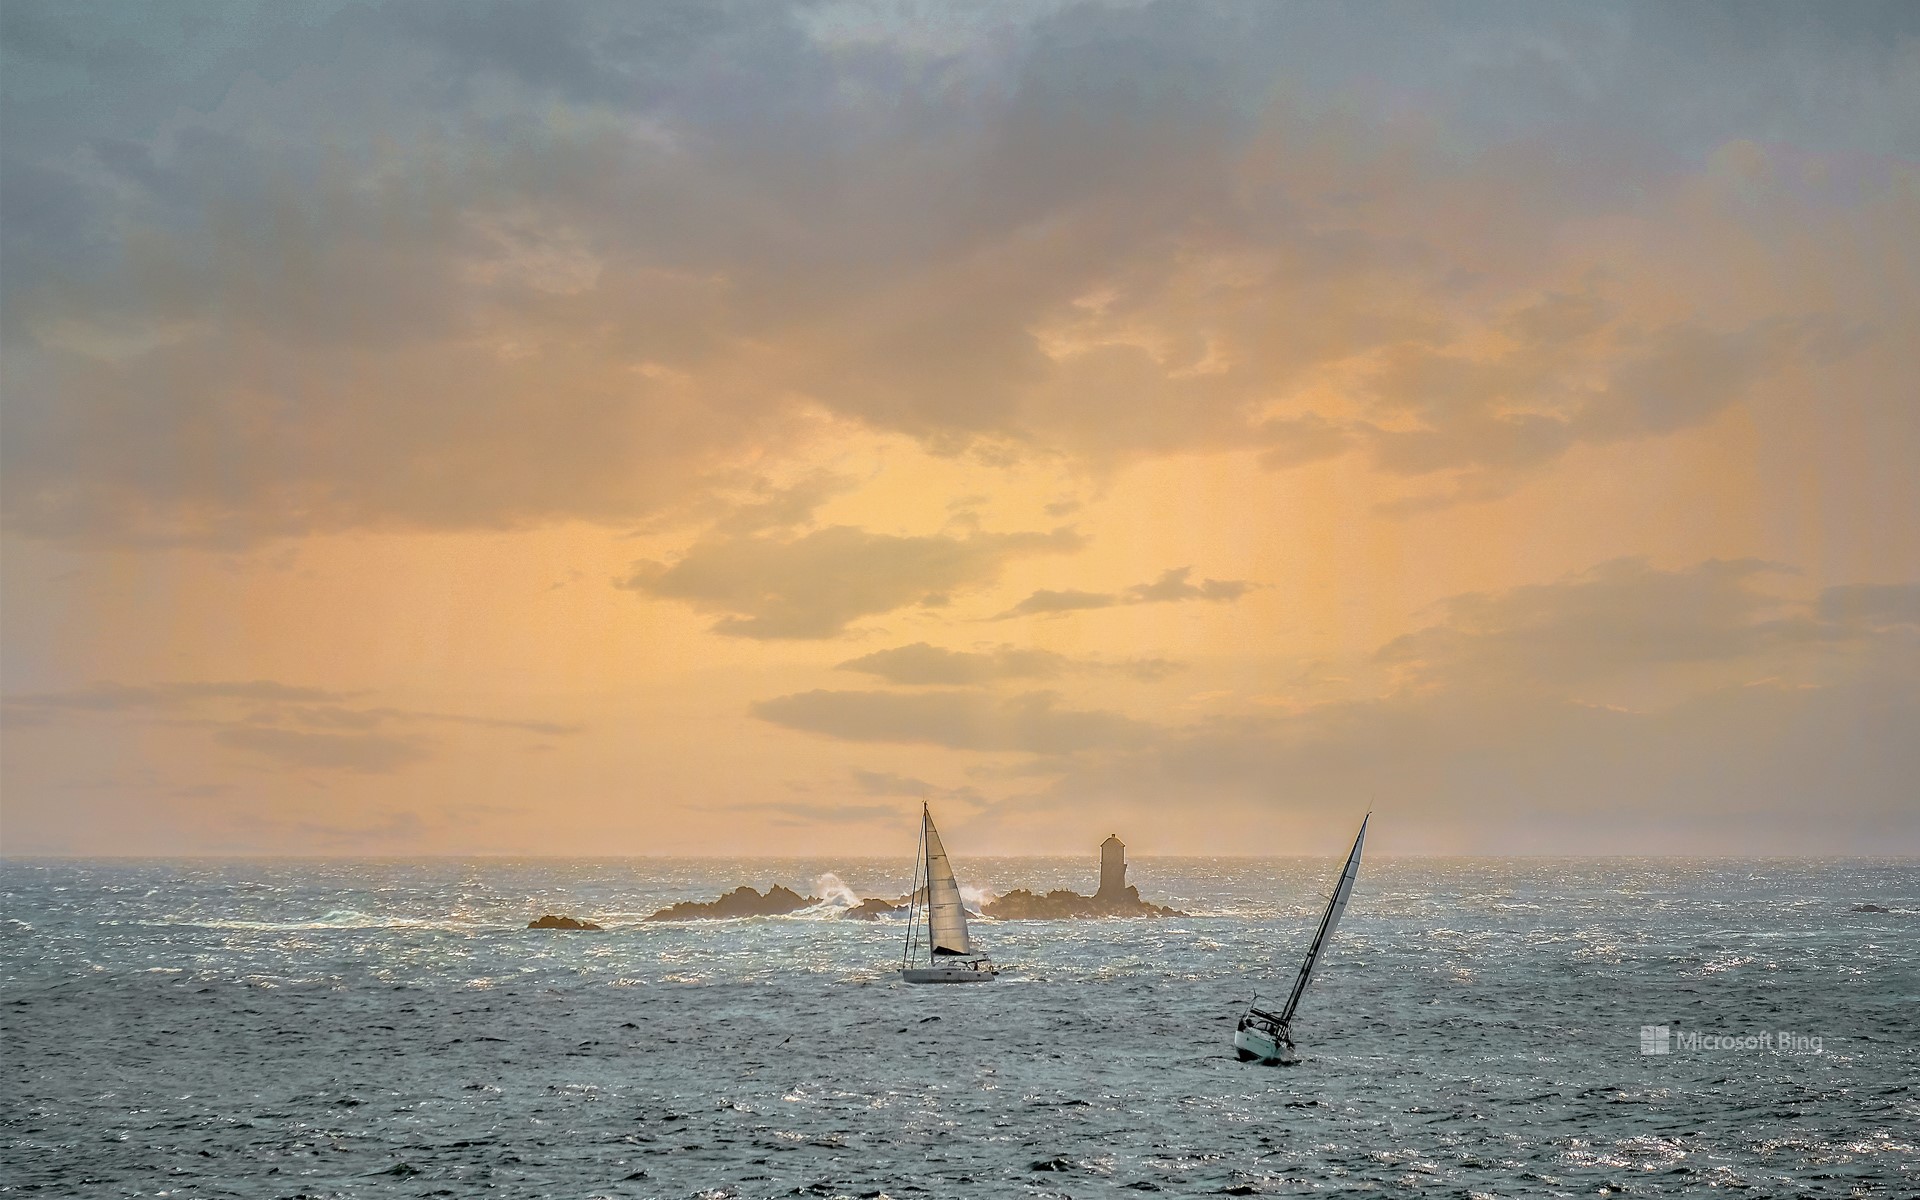 Sailboats at dusk in front of a lighthouse off Roscoff, Finistère, Brittany